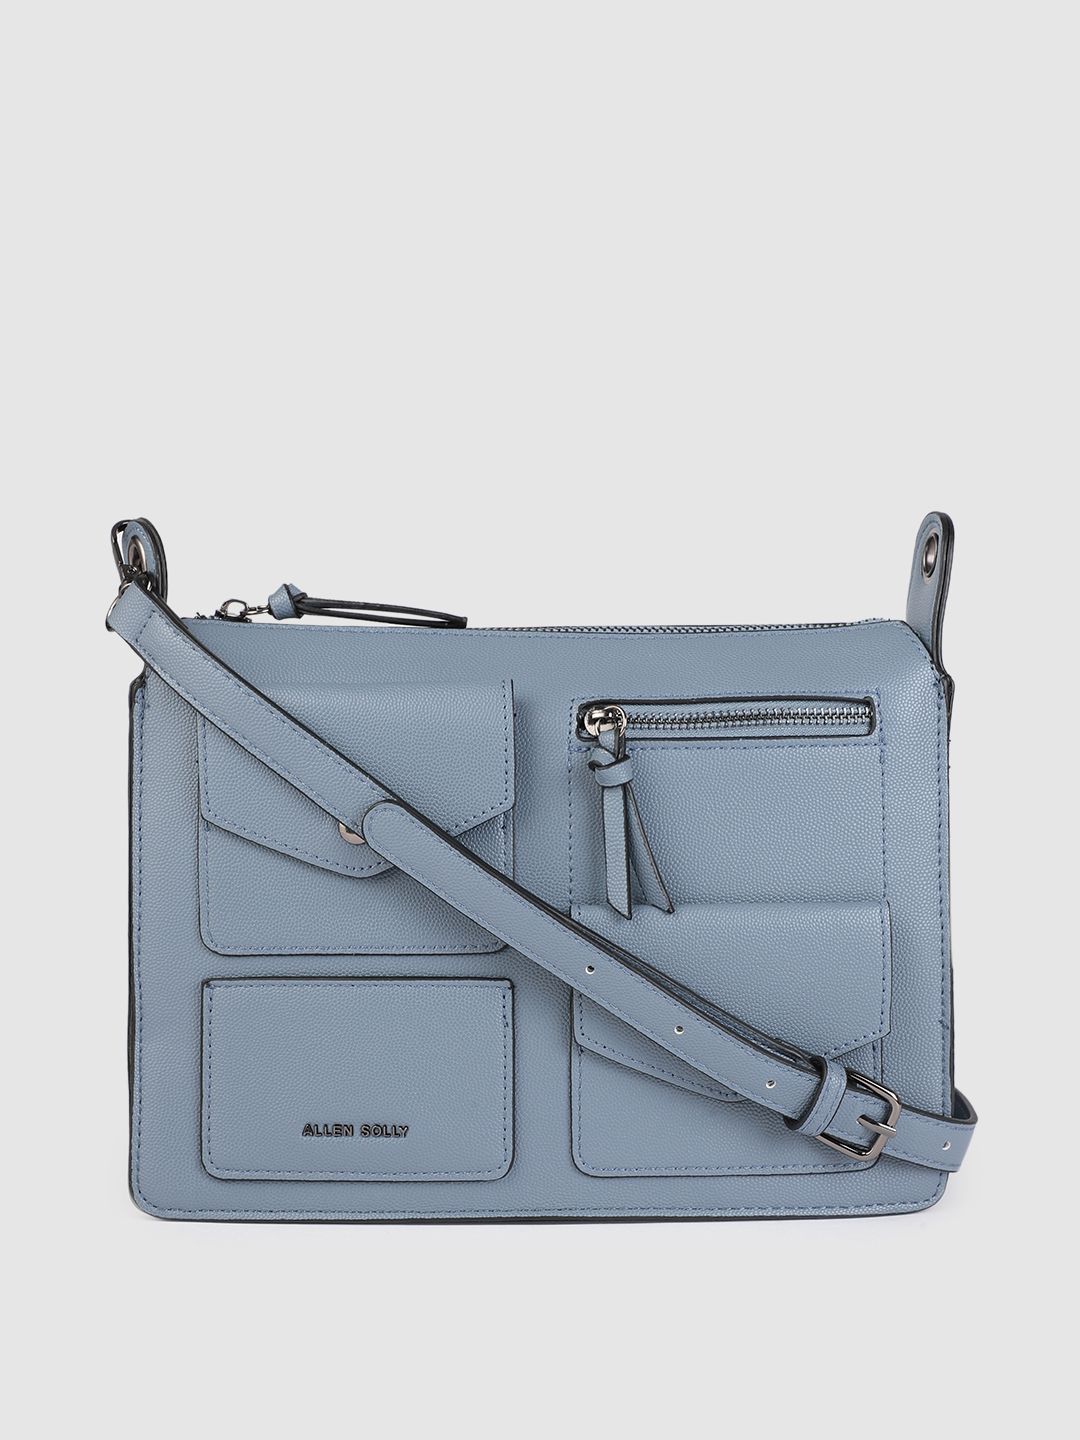 Allen Solly Blue Structured Sling Bag Price in India